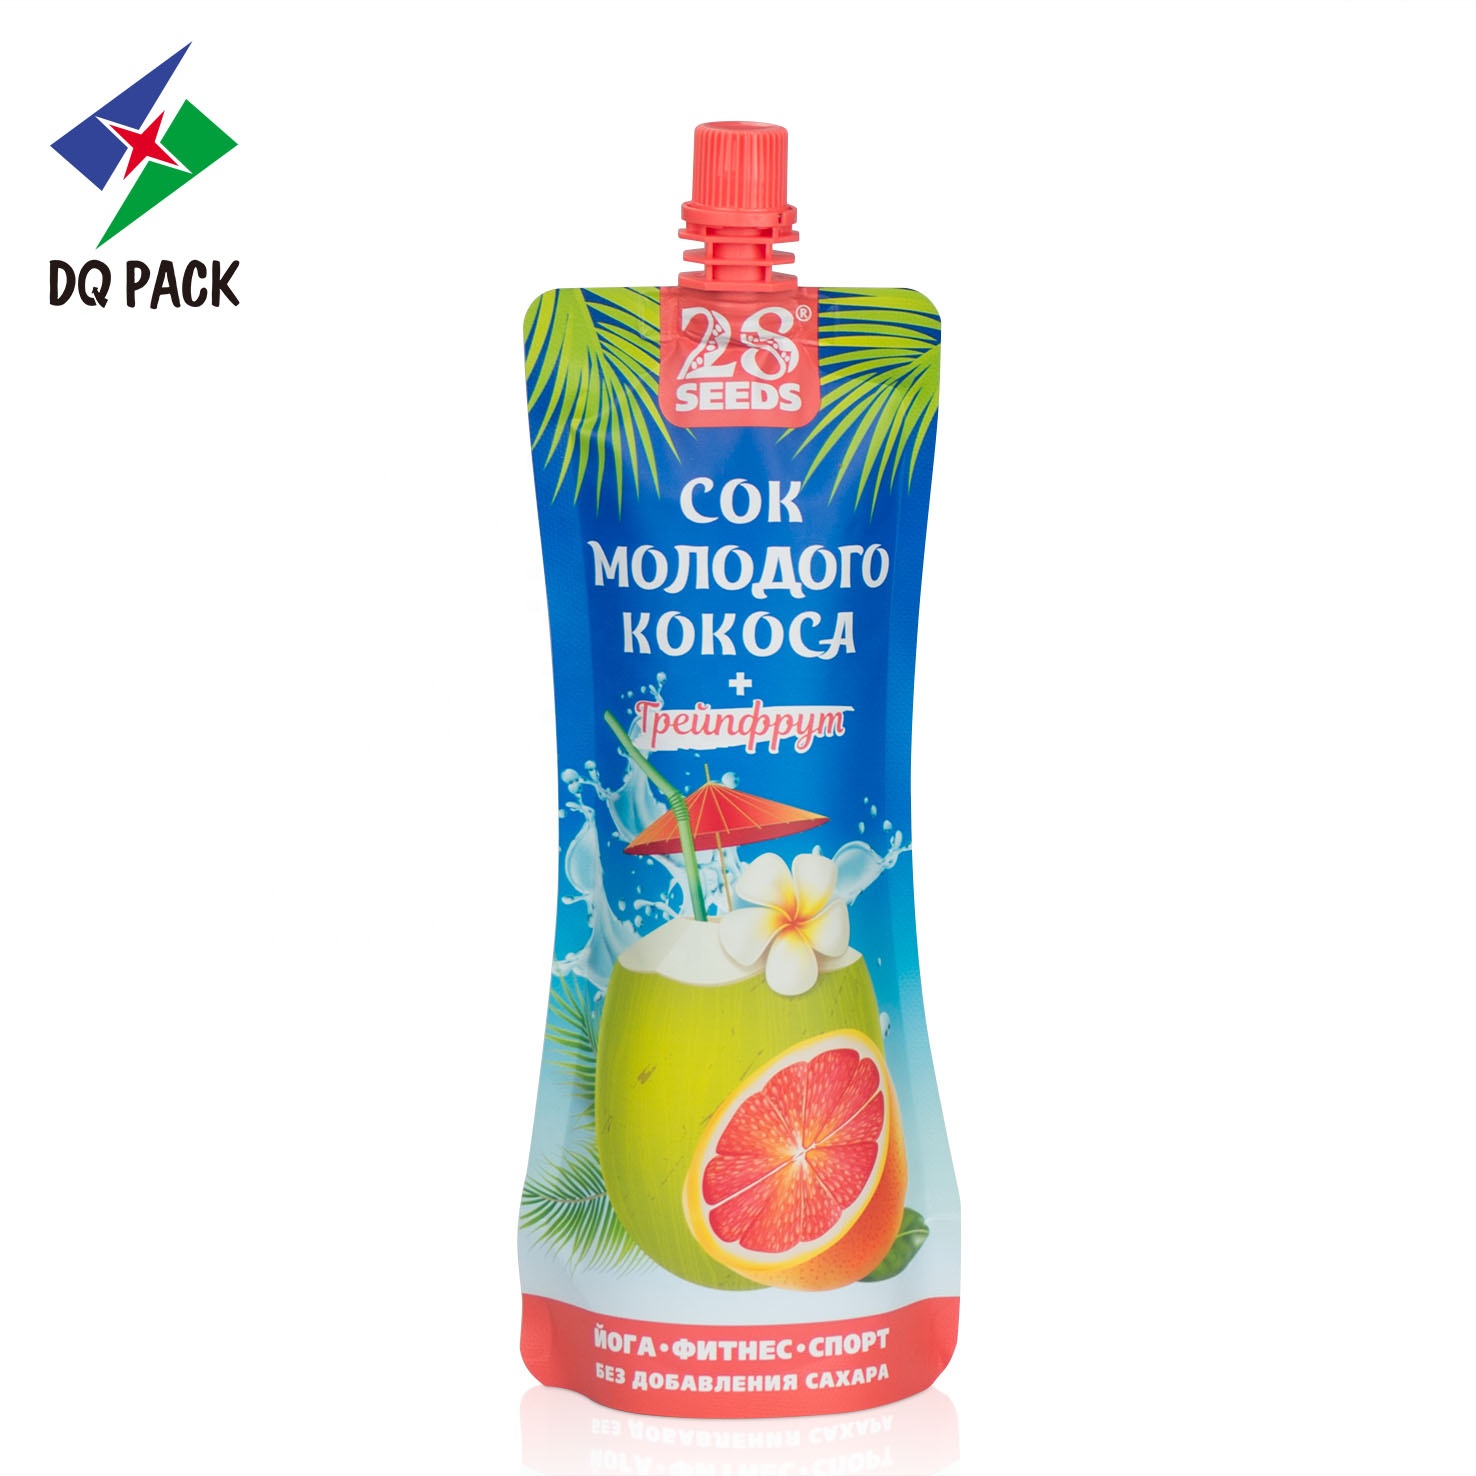 DQ PACK Reusable Fruit Juice Energy Pouch Drink Liquid Spout Pouch Bags Baby Food Packaging Squeeze Pouch